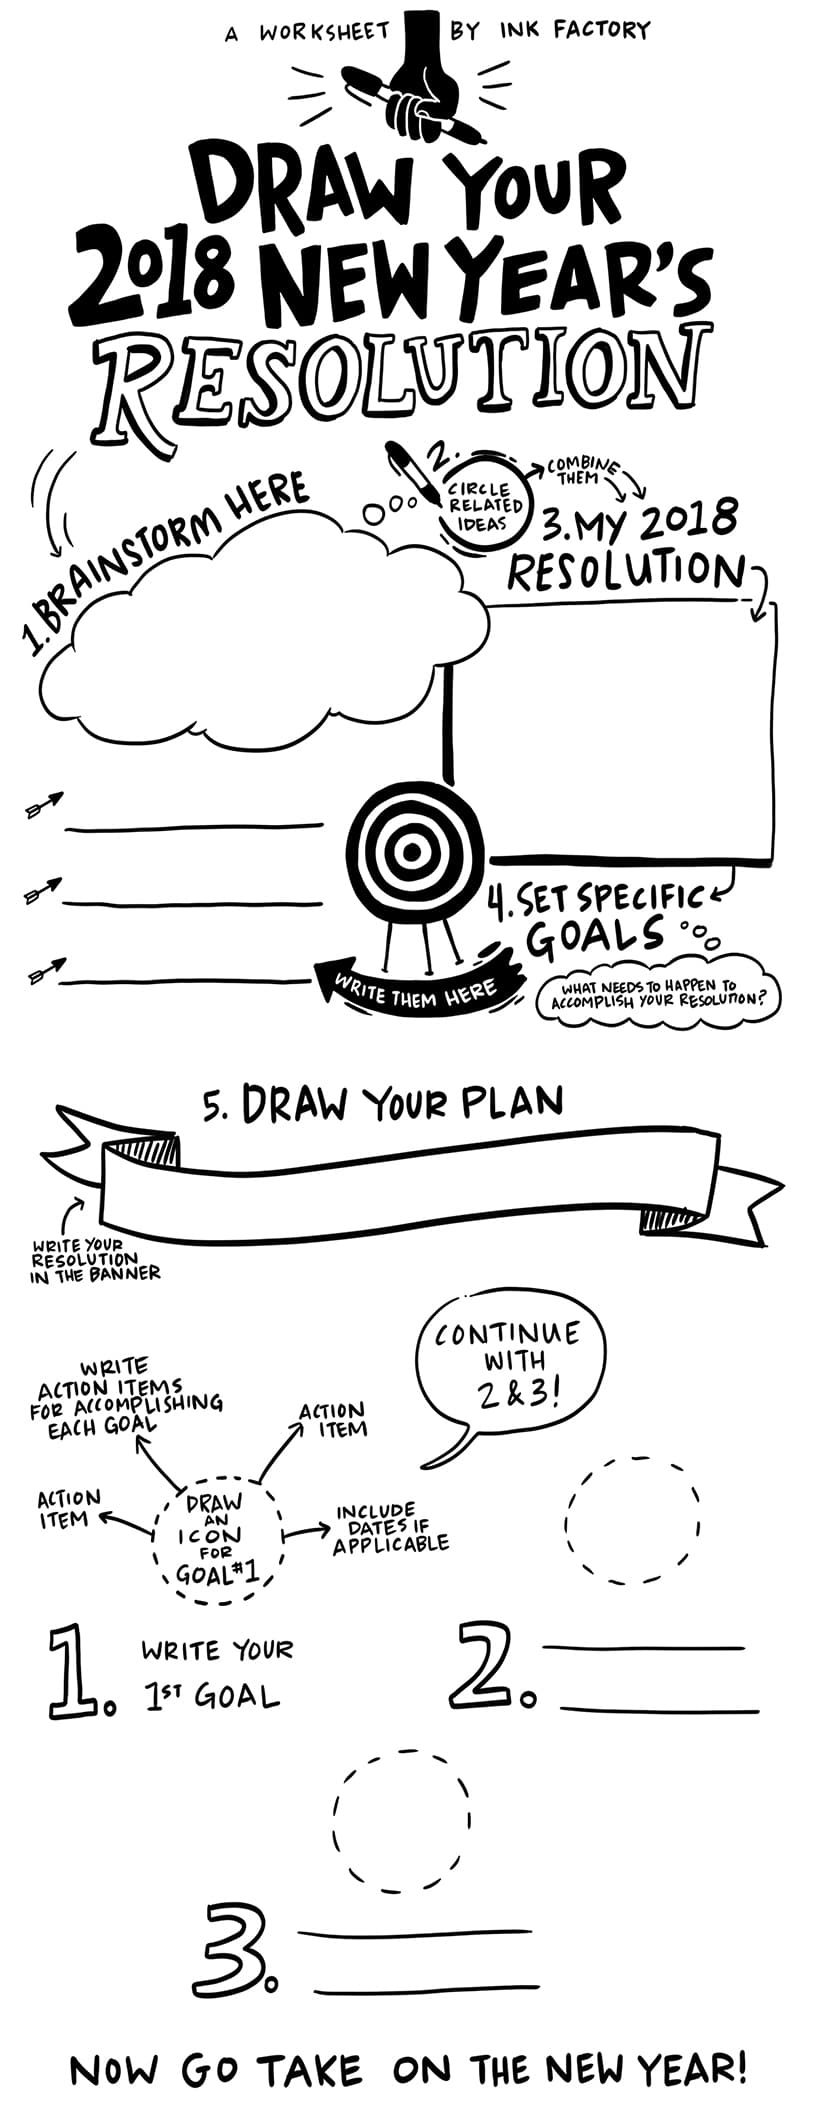 Draw Your New Year's Resolution! A Visual Worksheet by Ink Factory